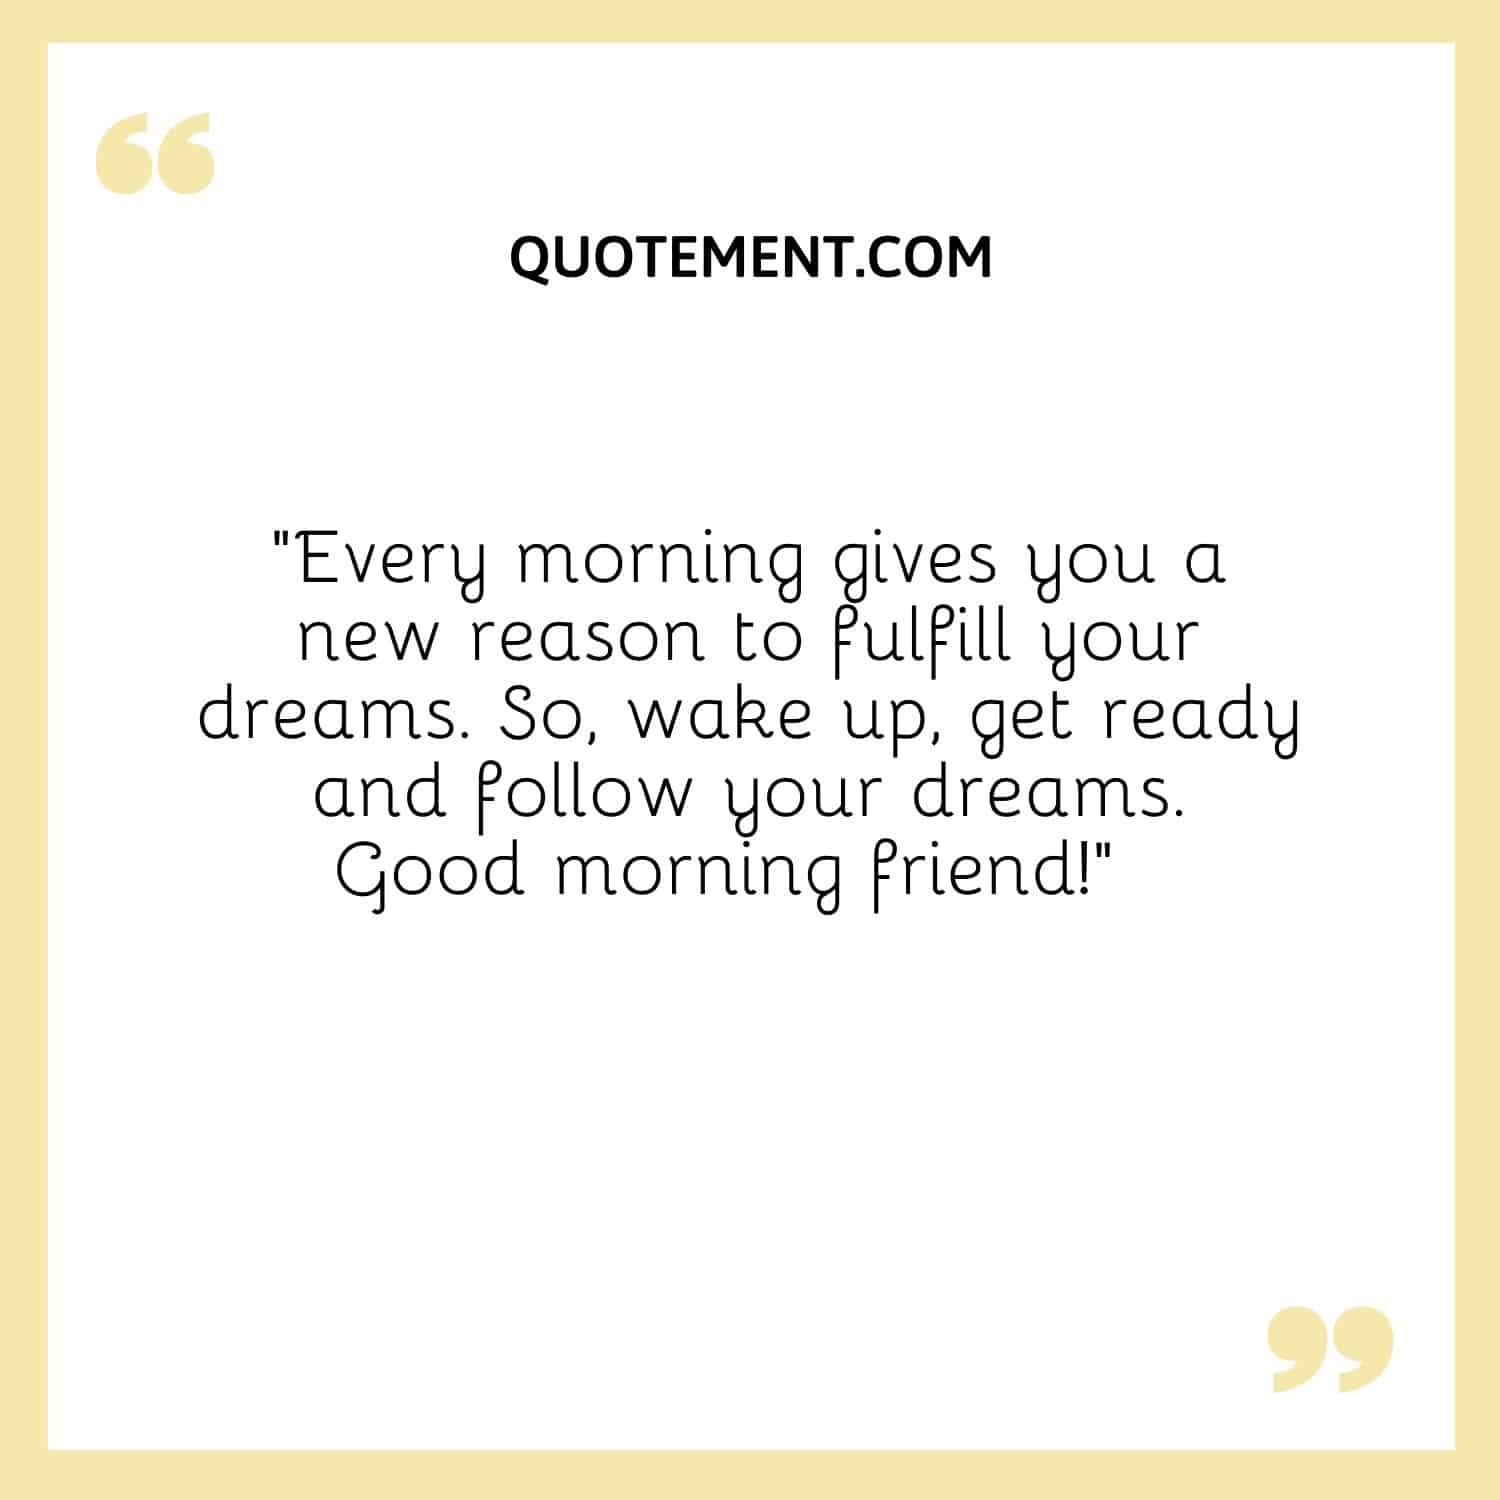 Every morning gives you a new reason to fulfill your dreams